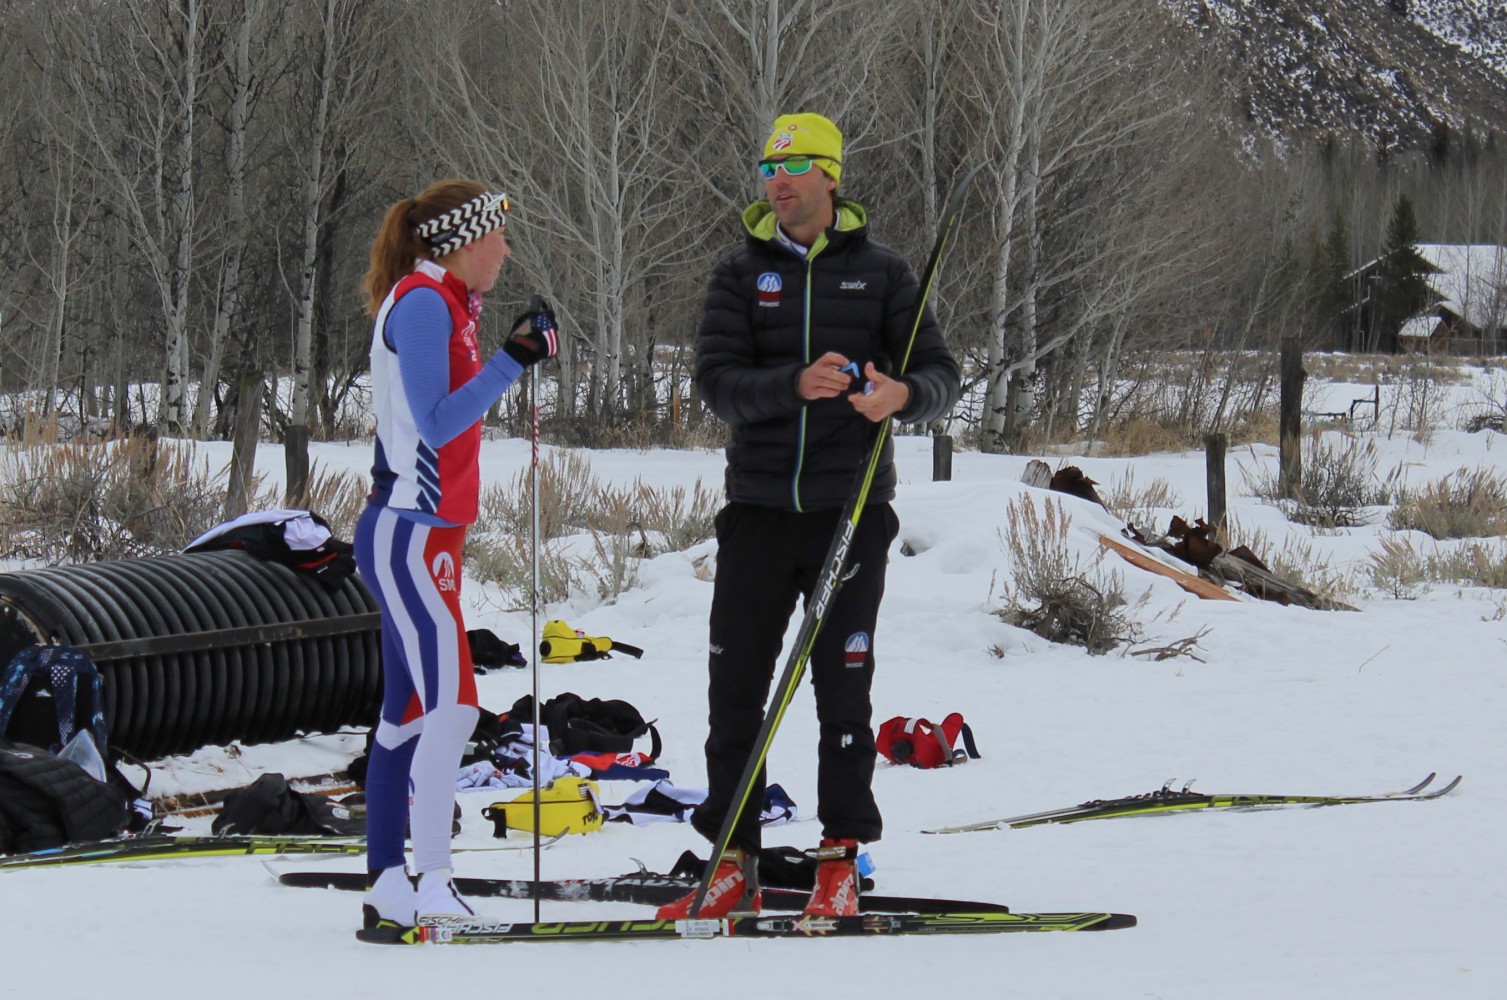 Sun Valley Videos: Chatting with USST Rookies Kern and Ogden (+ Sprint Course Preview)